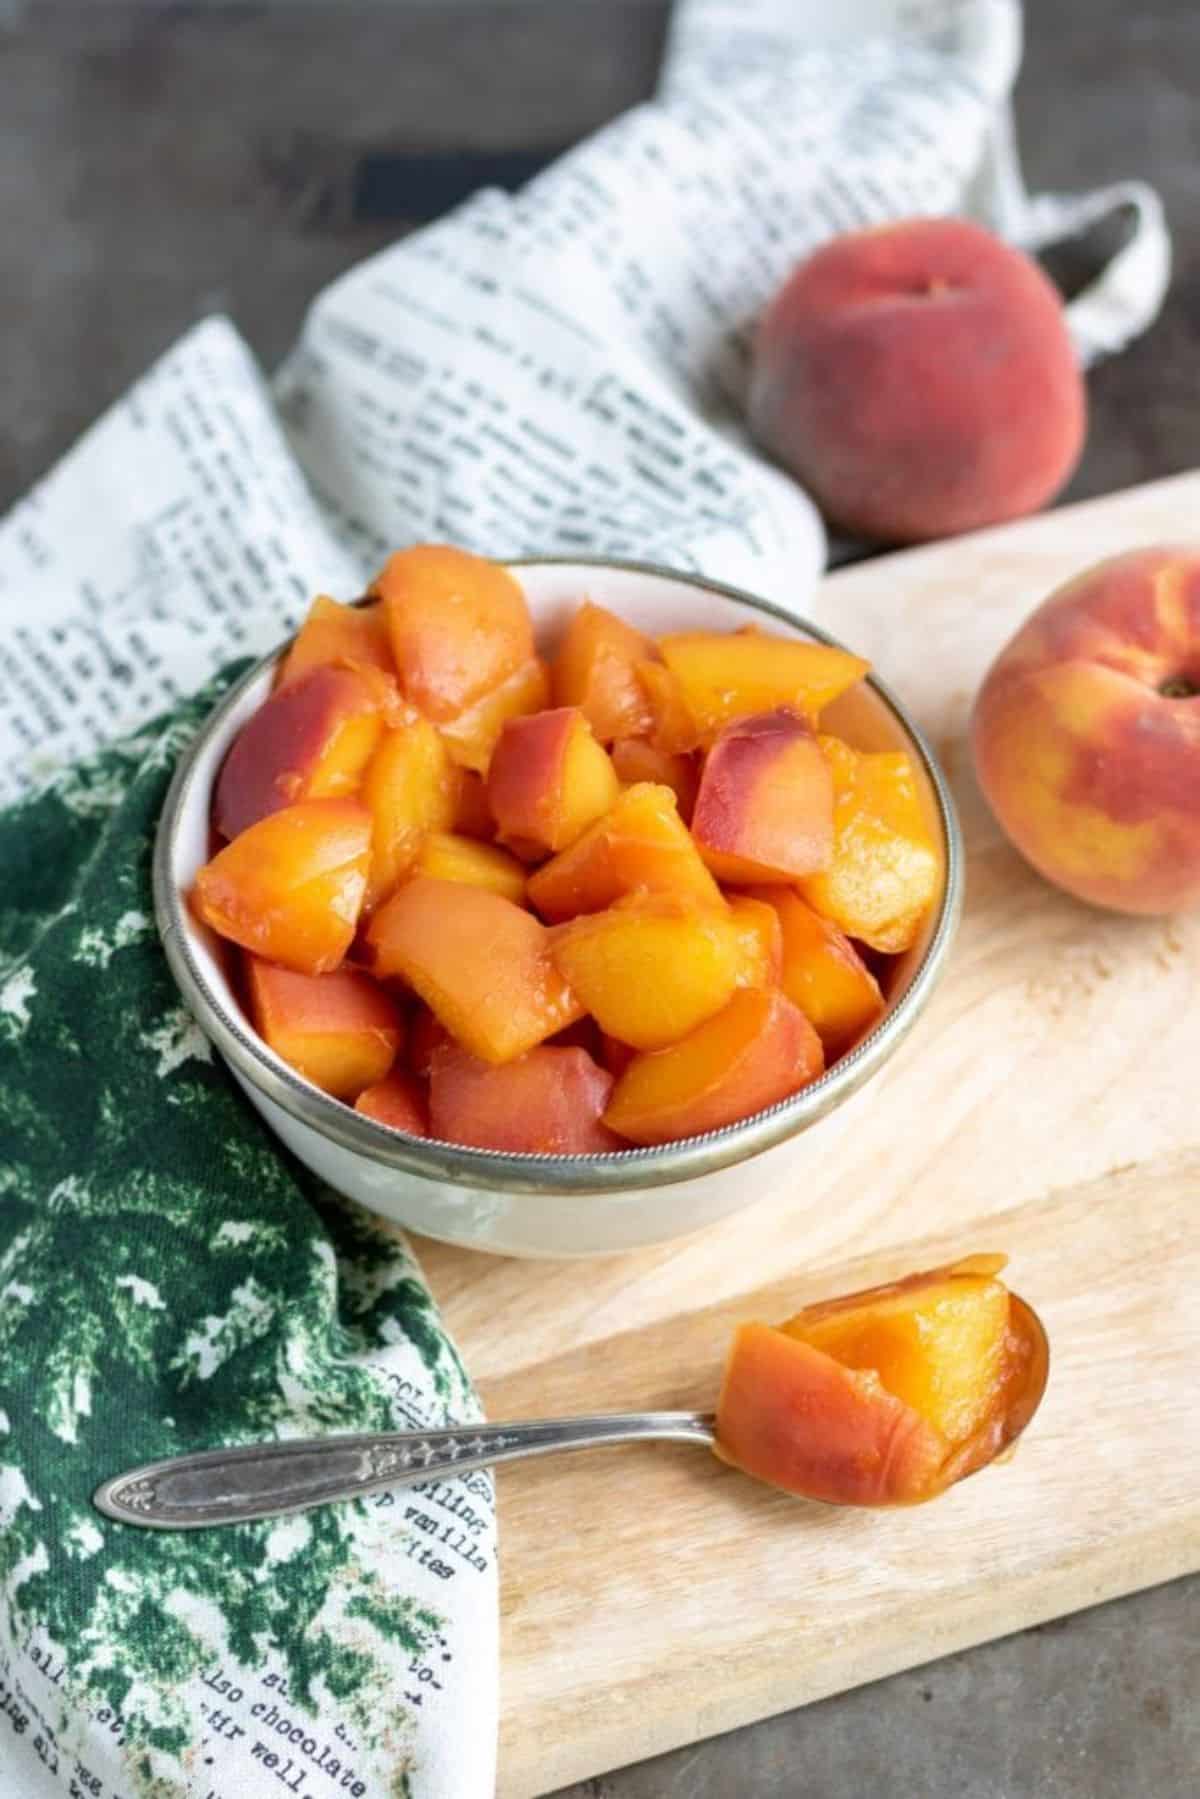 Juicy easy peach compote in a small bowl.